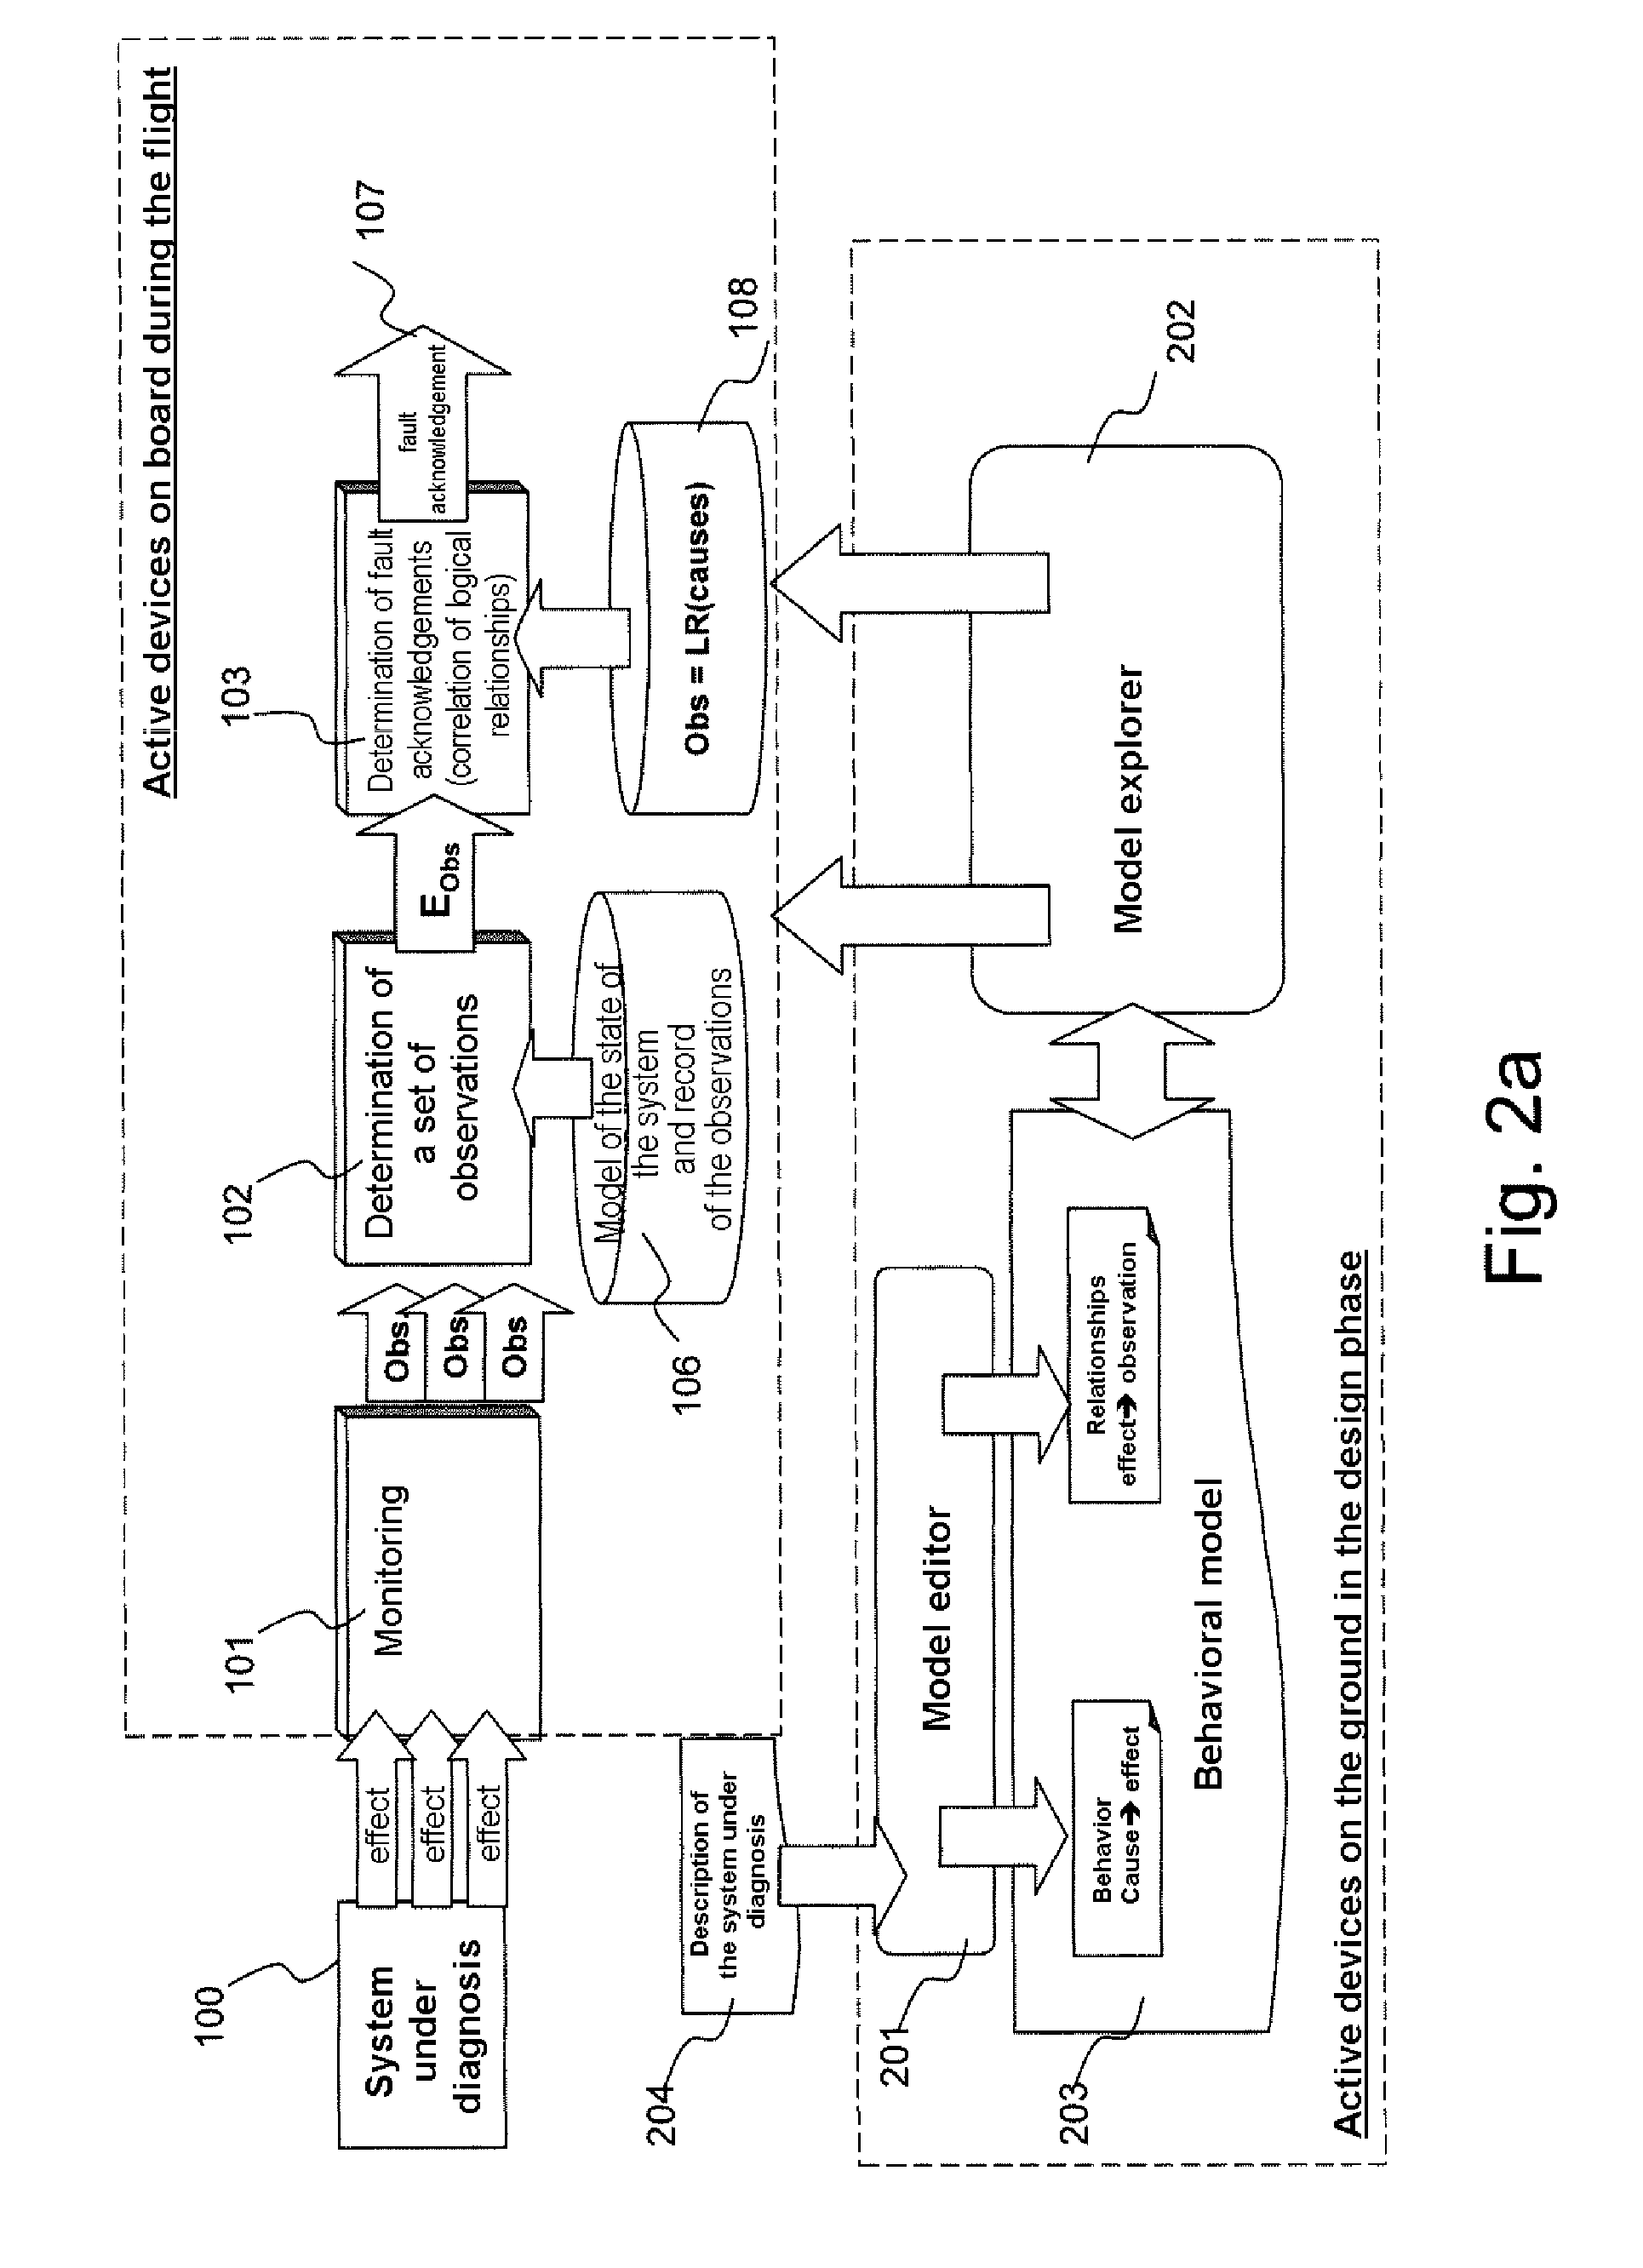 Method and device for performing a maintenance function